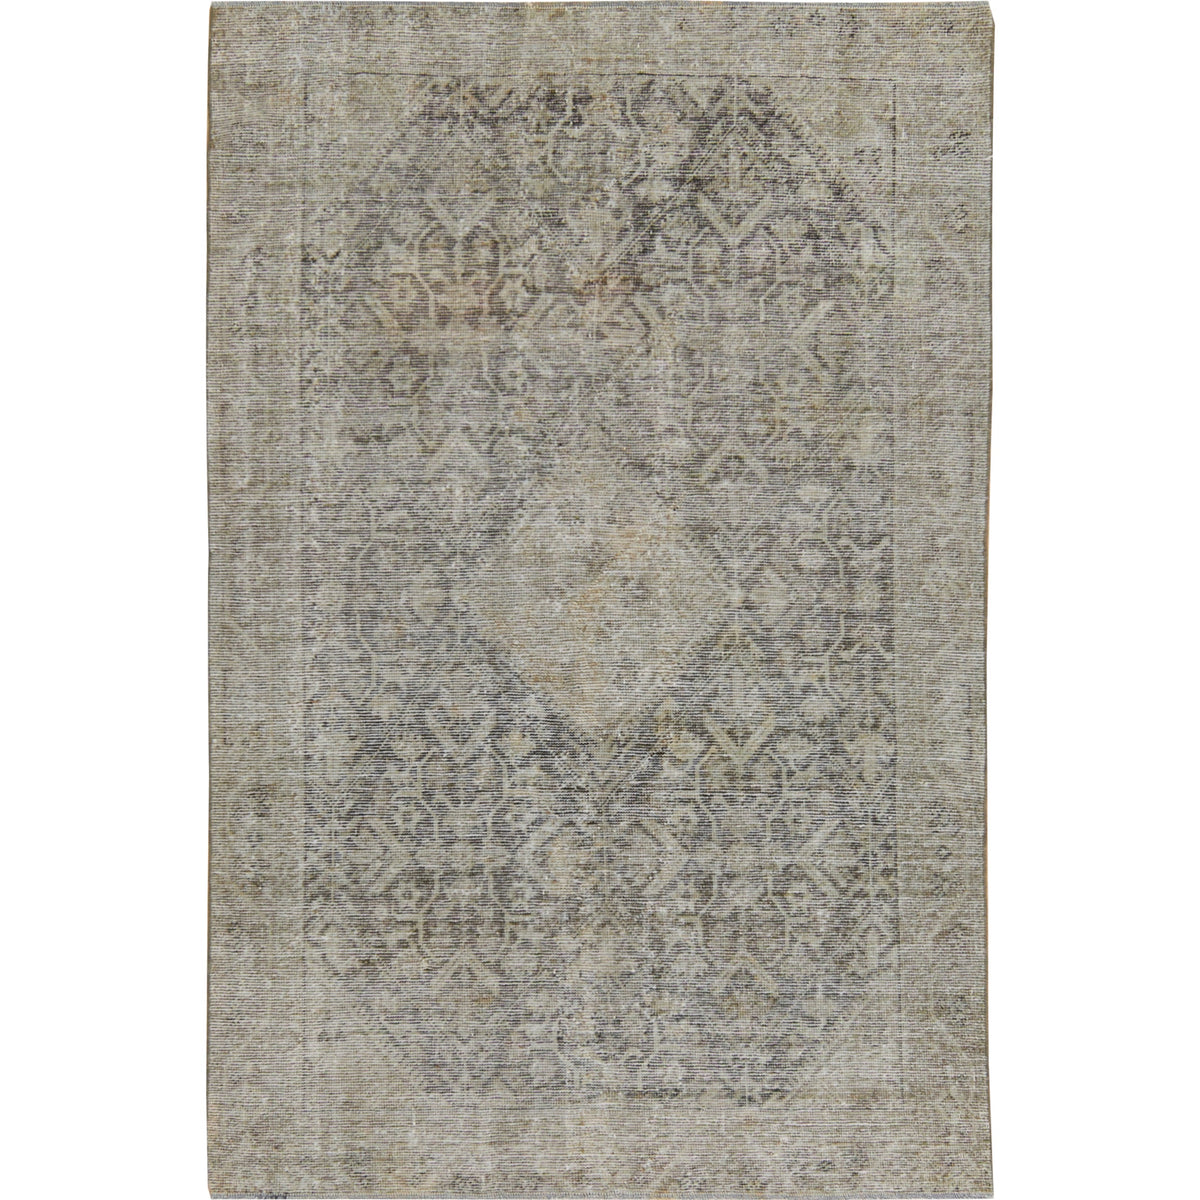 Roberta - The Brown Majesty of Persian Rugs | Kuden Rugs